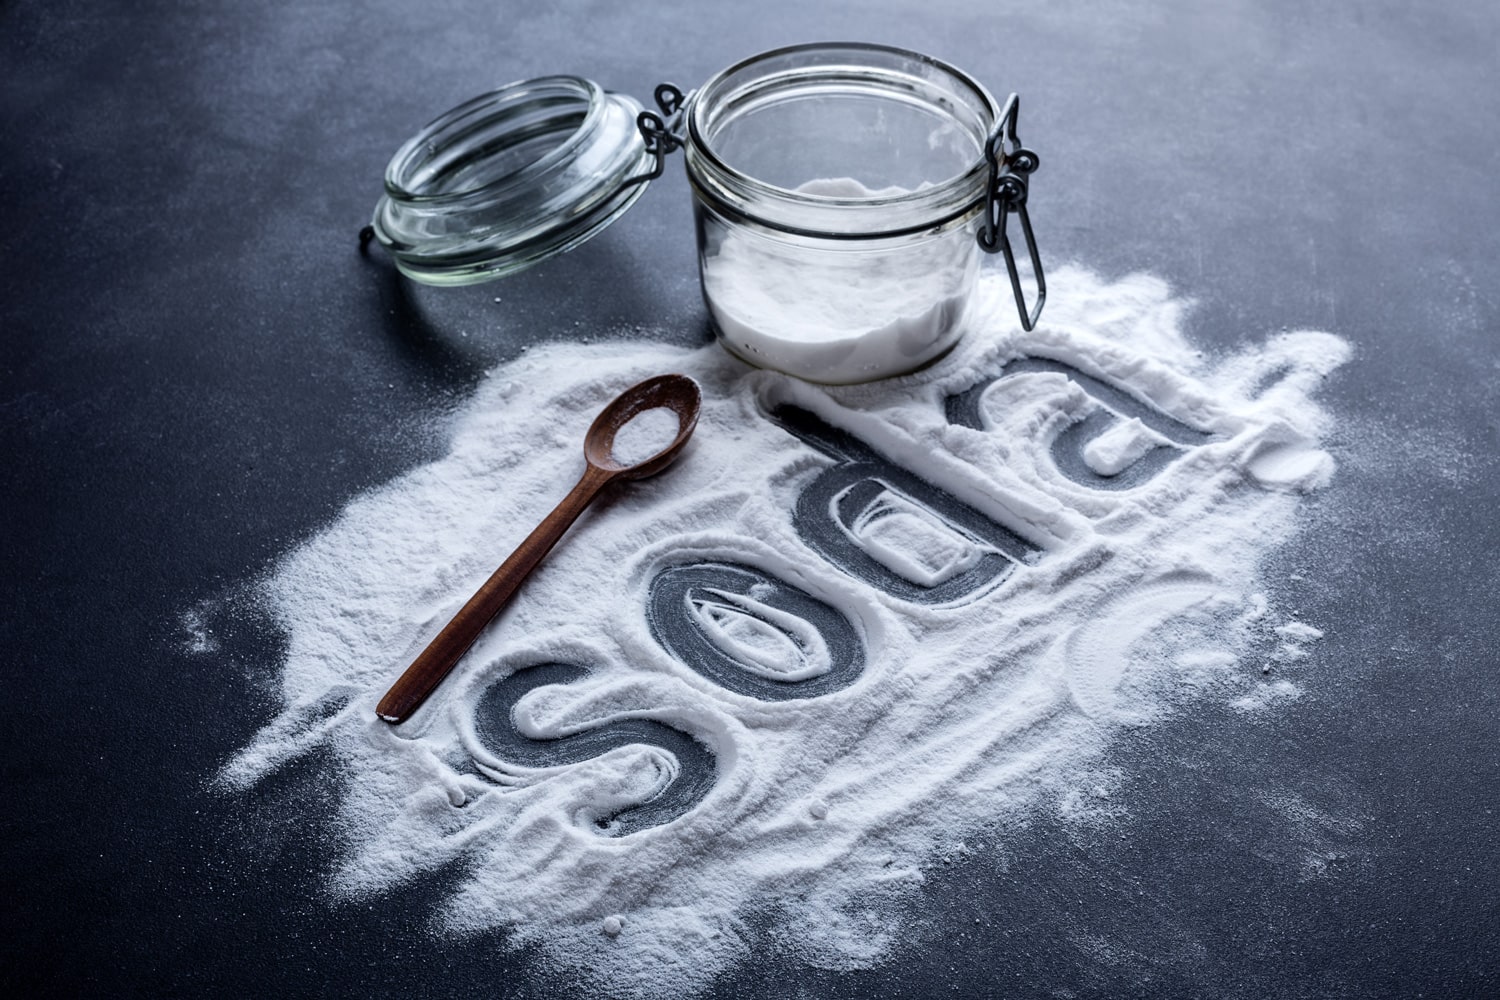 Baking soda scattered from a glass jar on a dark